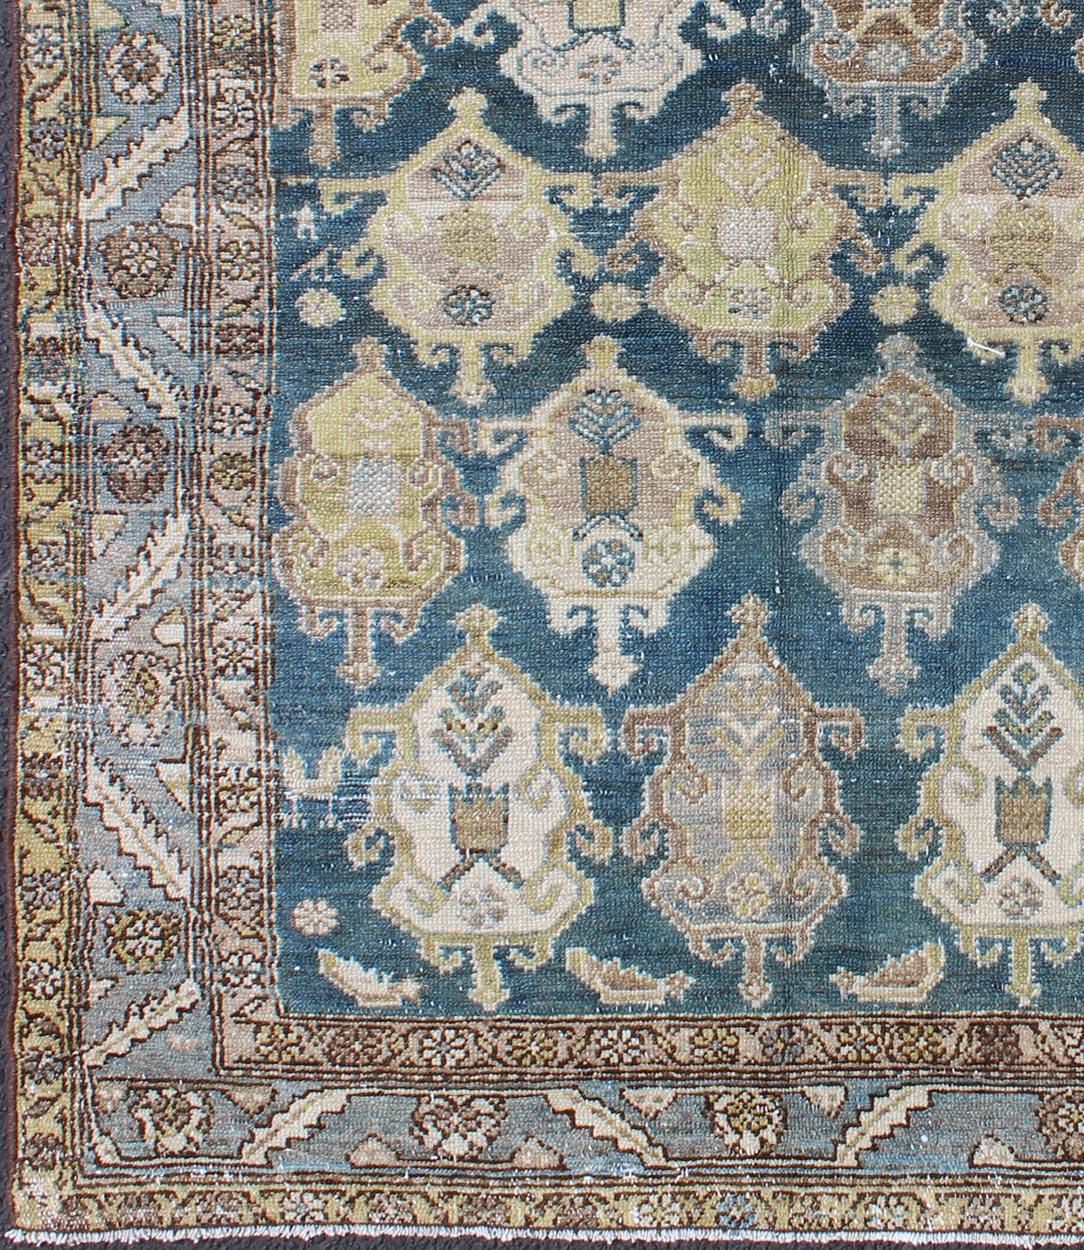 All-over large scale design in dark blue Persian Malayer antique rug, rug na-180707, country of origin / type: Iran / Malayer, circa 1920.

This beautiful antique early 20th century Persian Malayer carpet features an all-over design of repeating